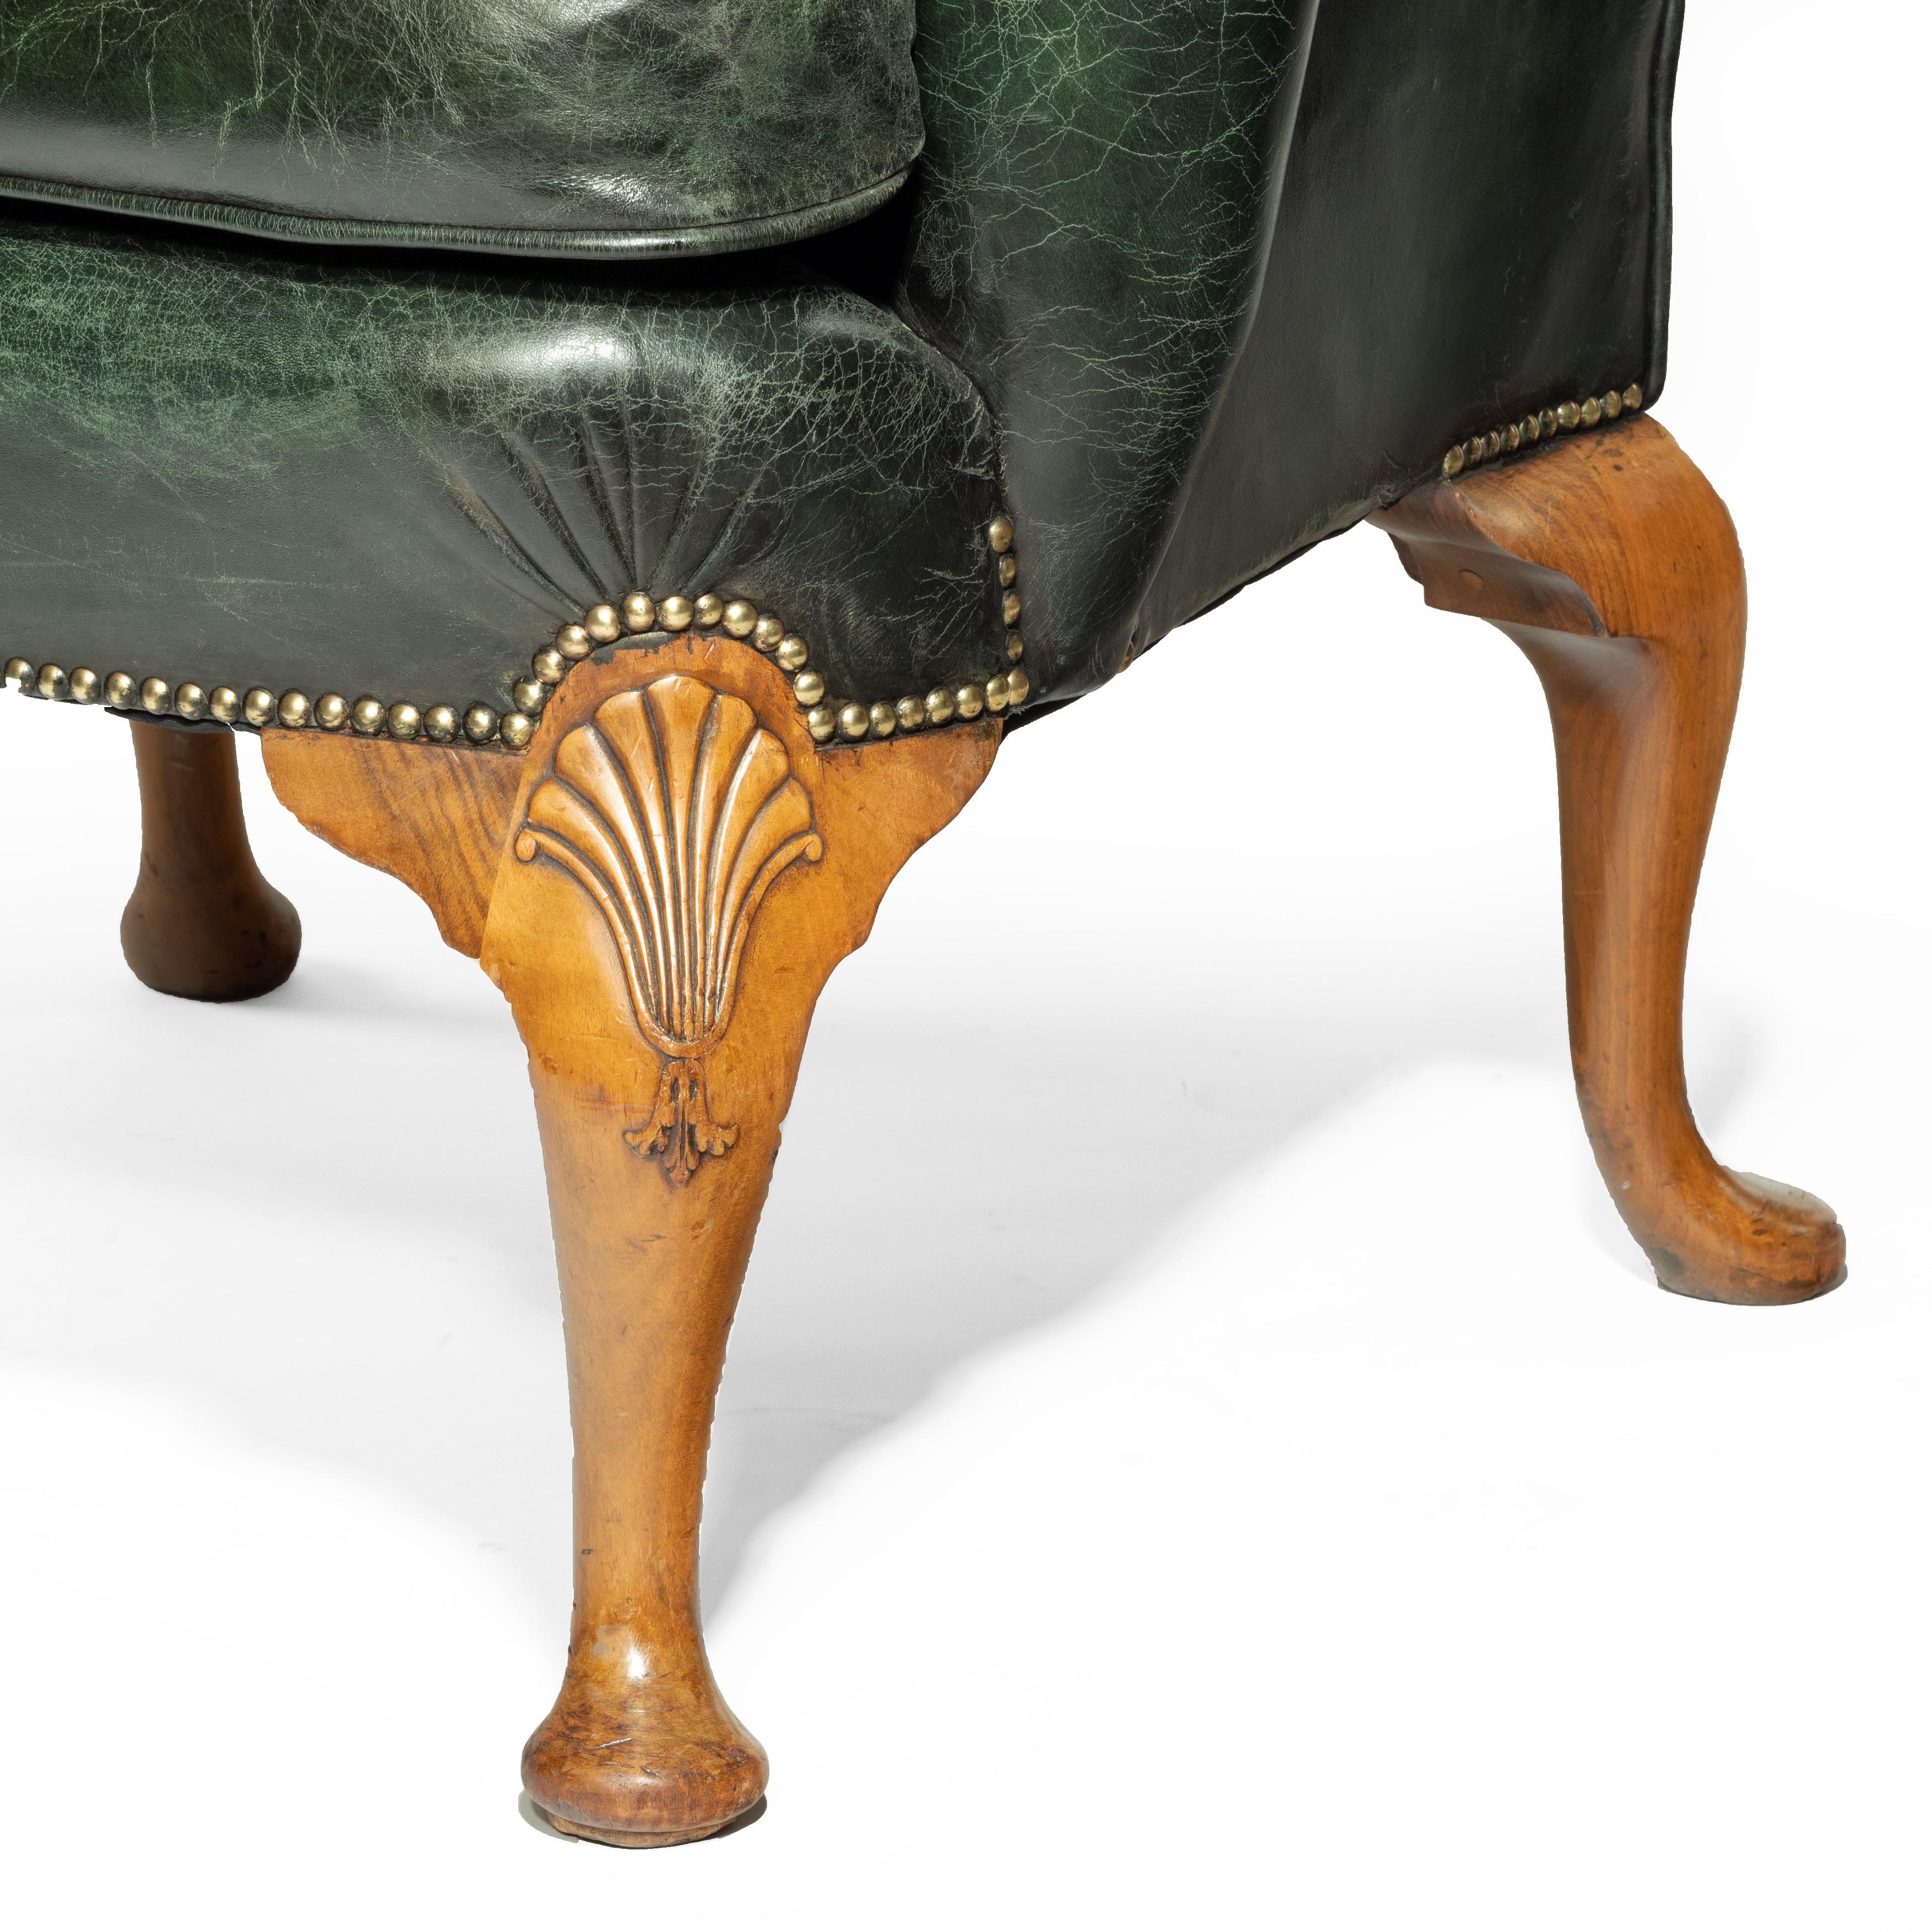 An Edwardian walnut wing armchair, of typical form with scrolling wings and arms, on four cabriole legs, the front knees carved with shells, re-upholstered throughout in distressed brass-studded green leather, English, circa 1910.

Measures: H 44in,